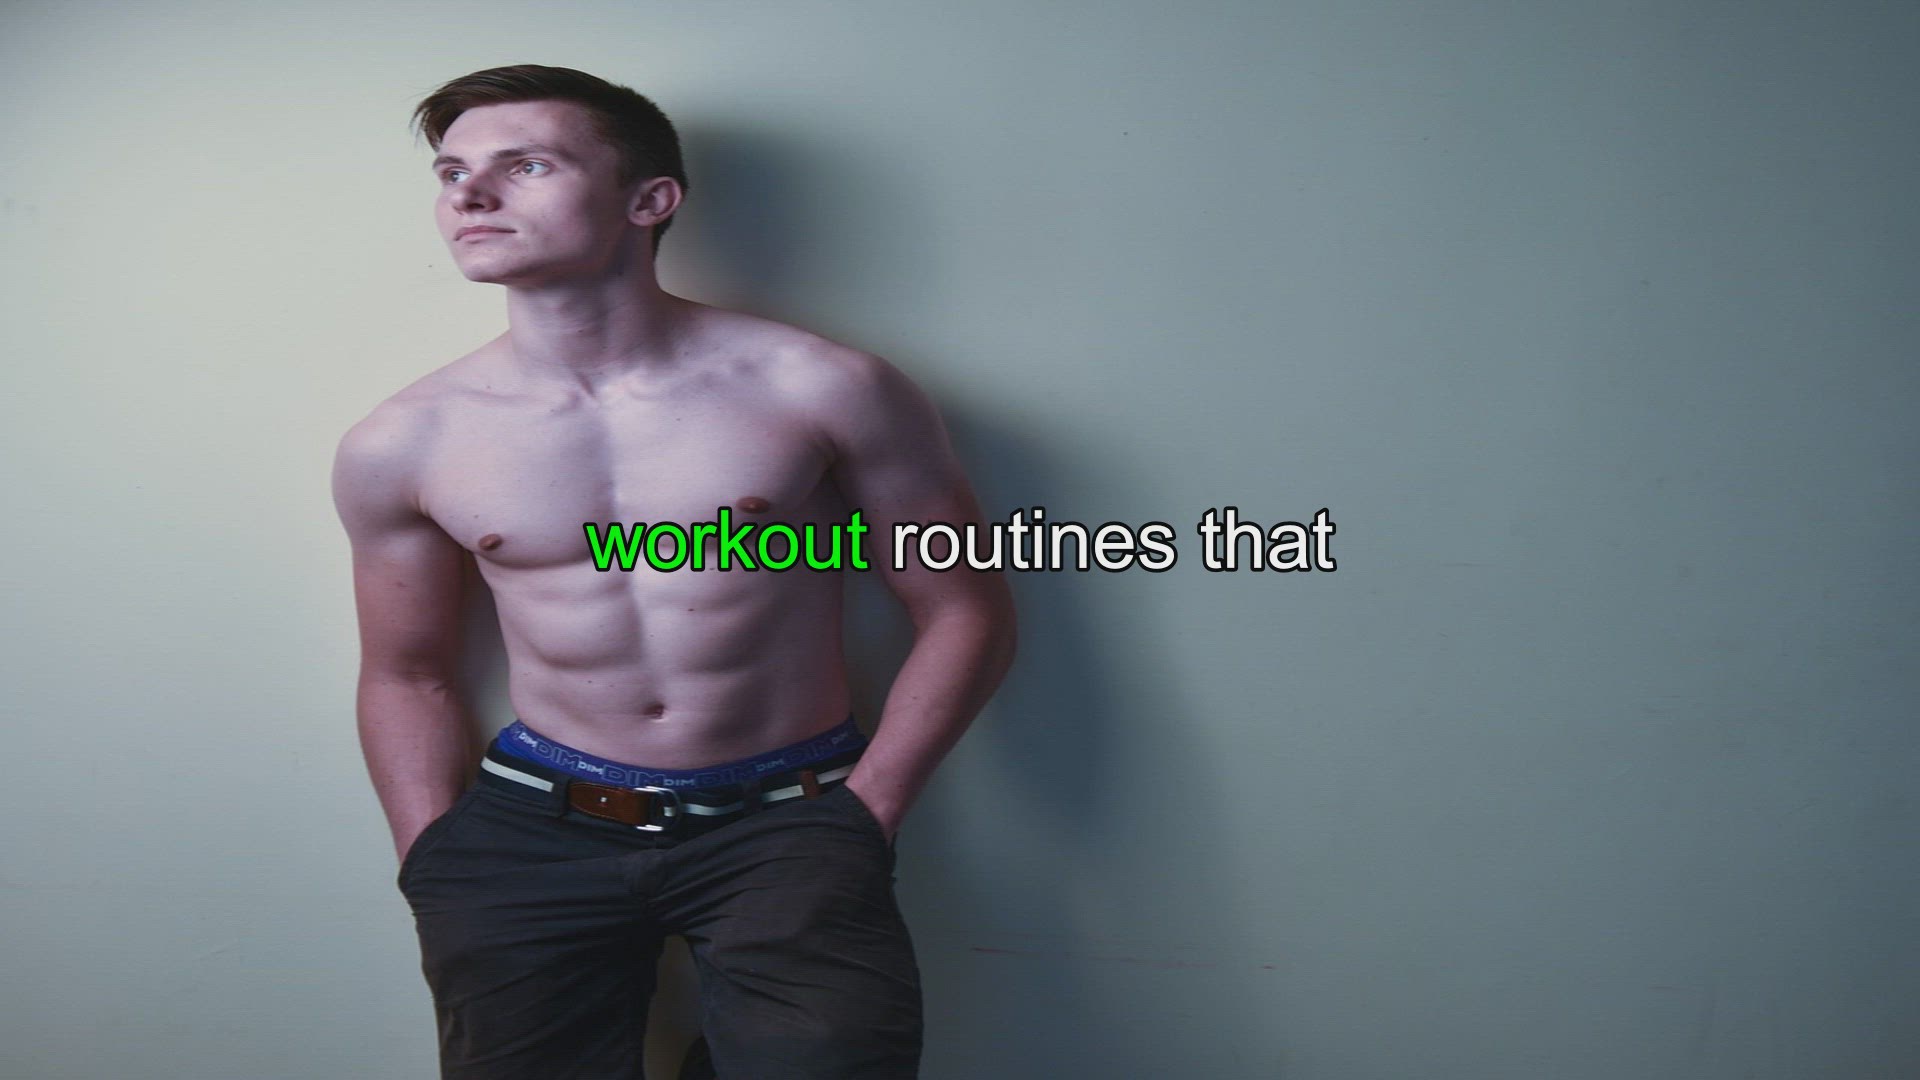 6 Week Workout Program To Build Muscle (With PDF)